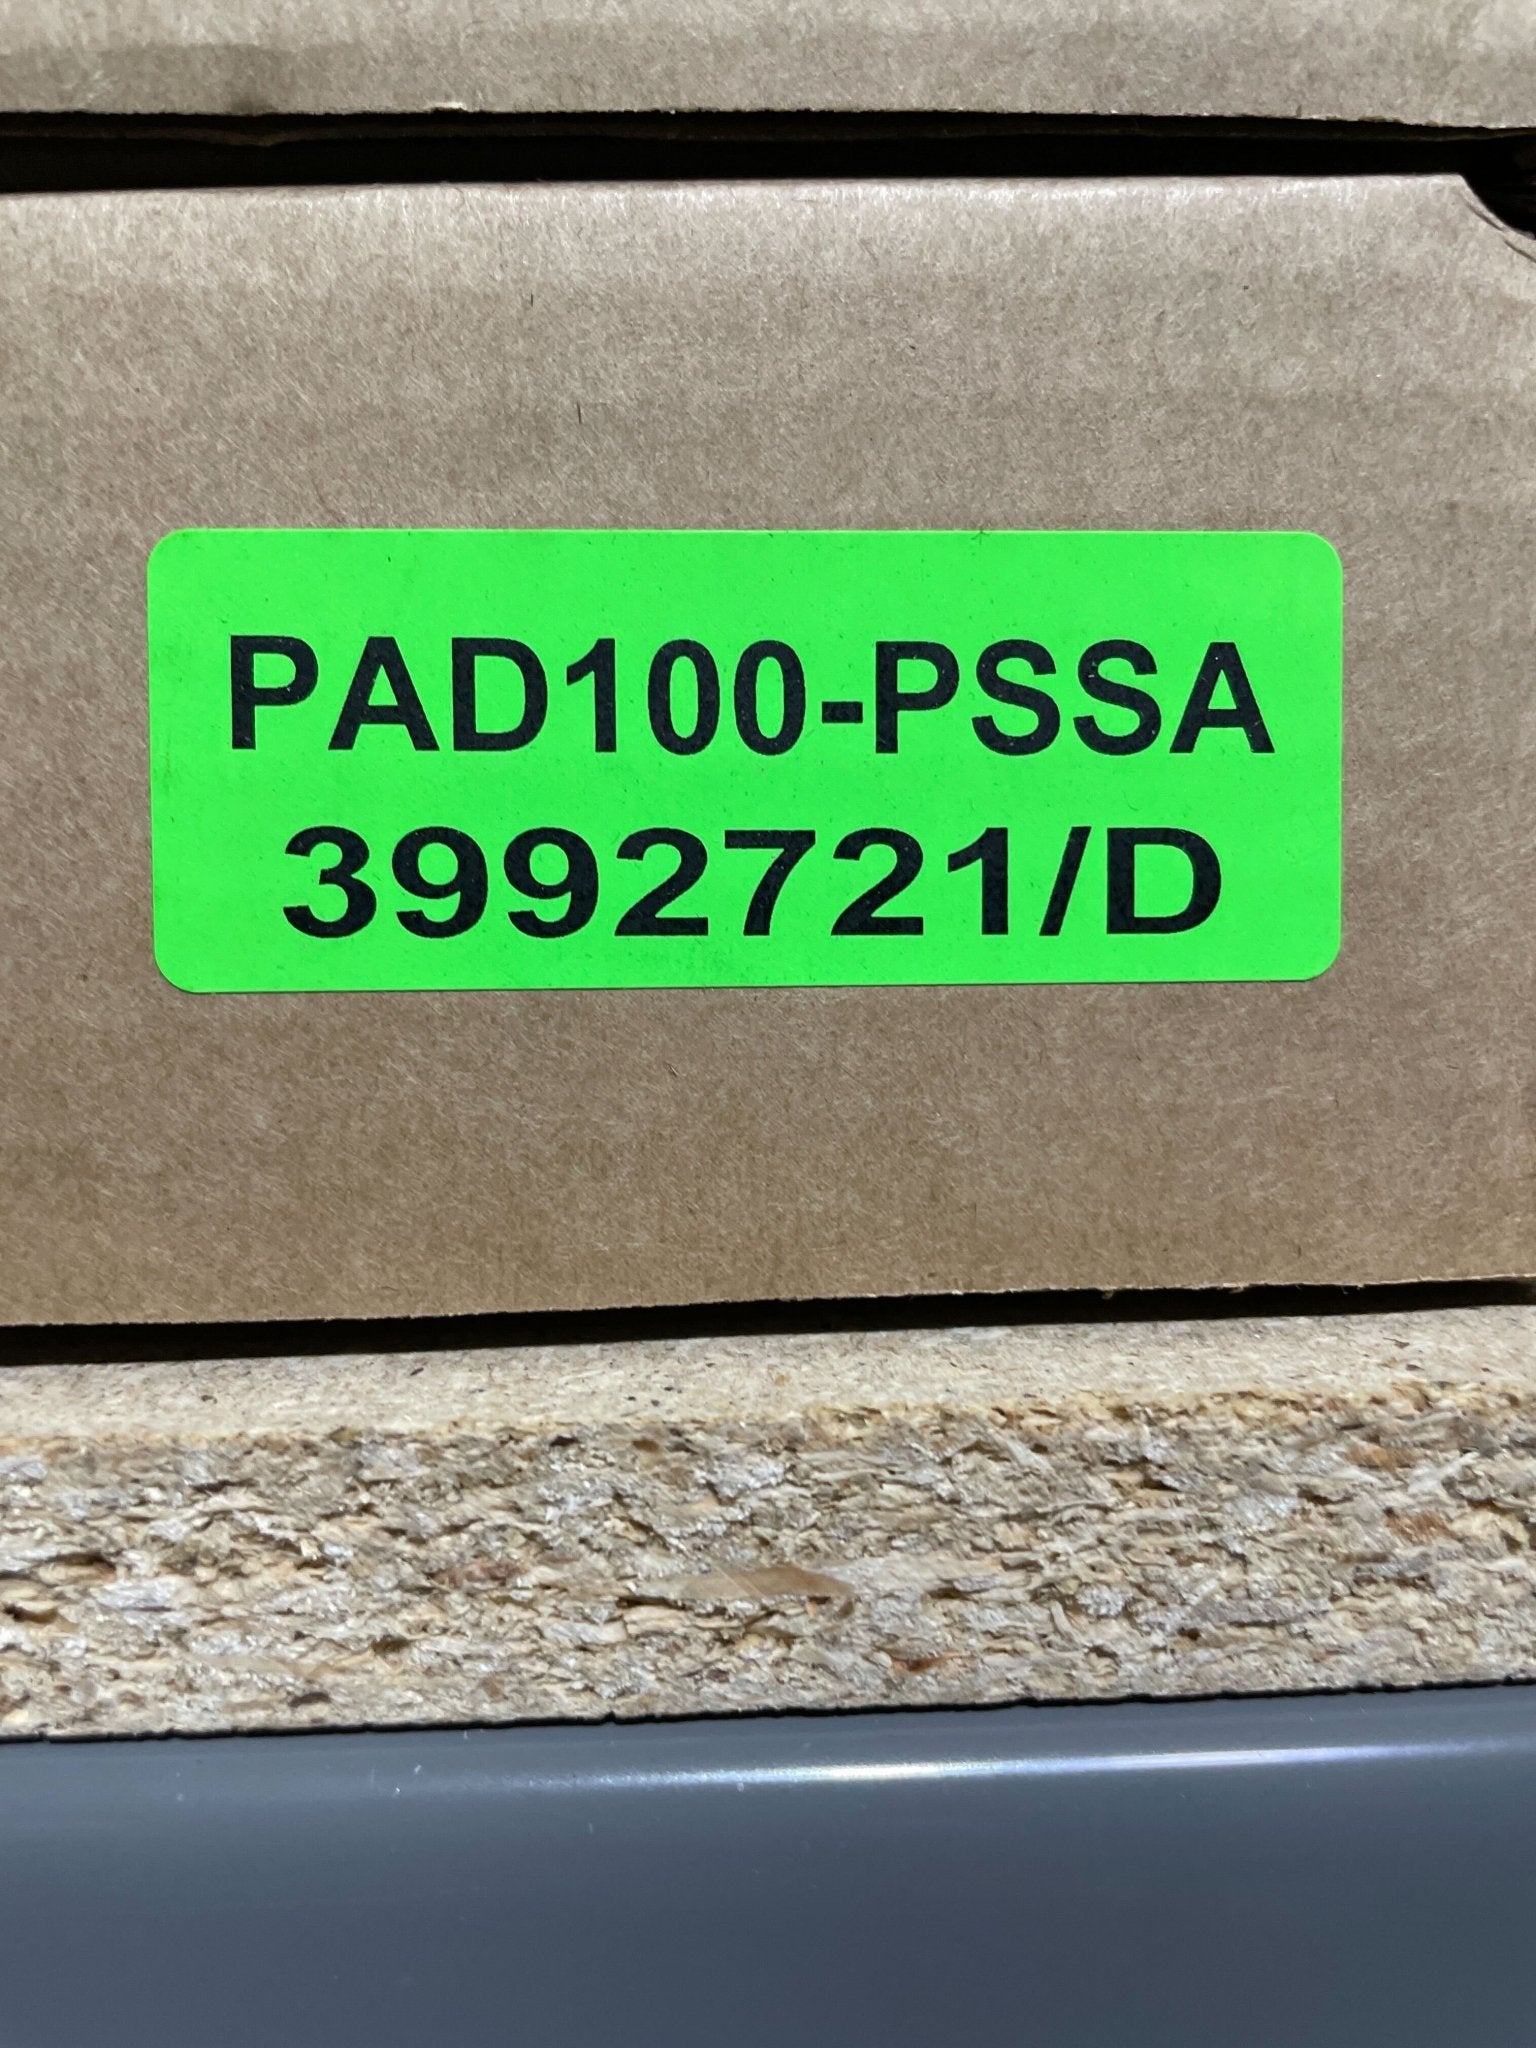 Potter PAD100-PSSA - The Fire Alarm Supplier